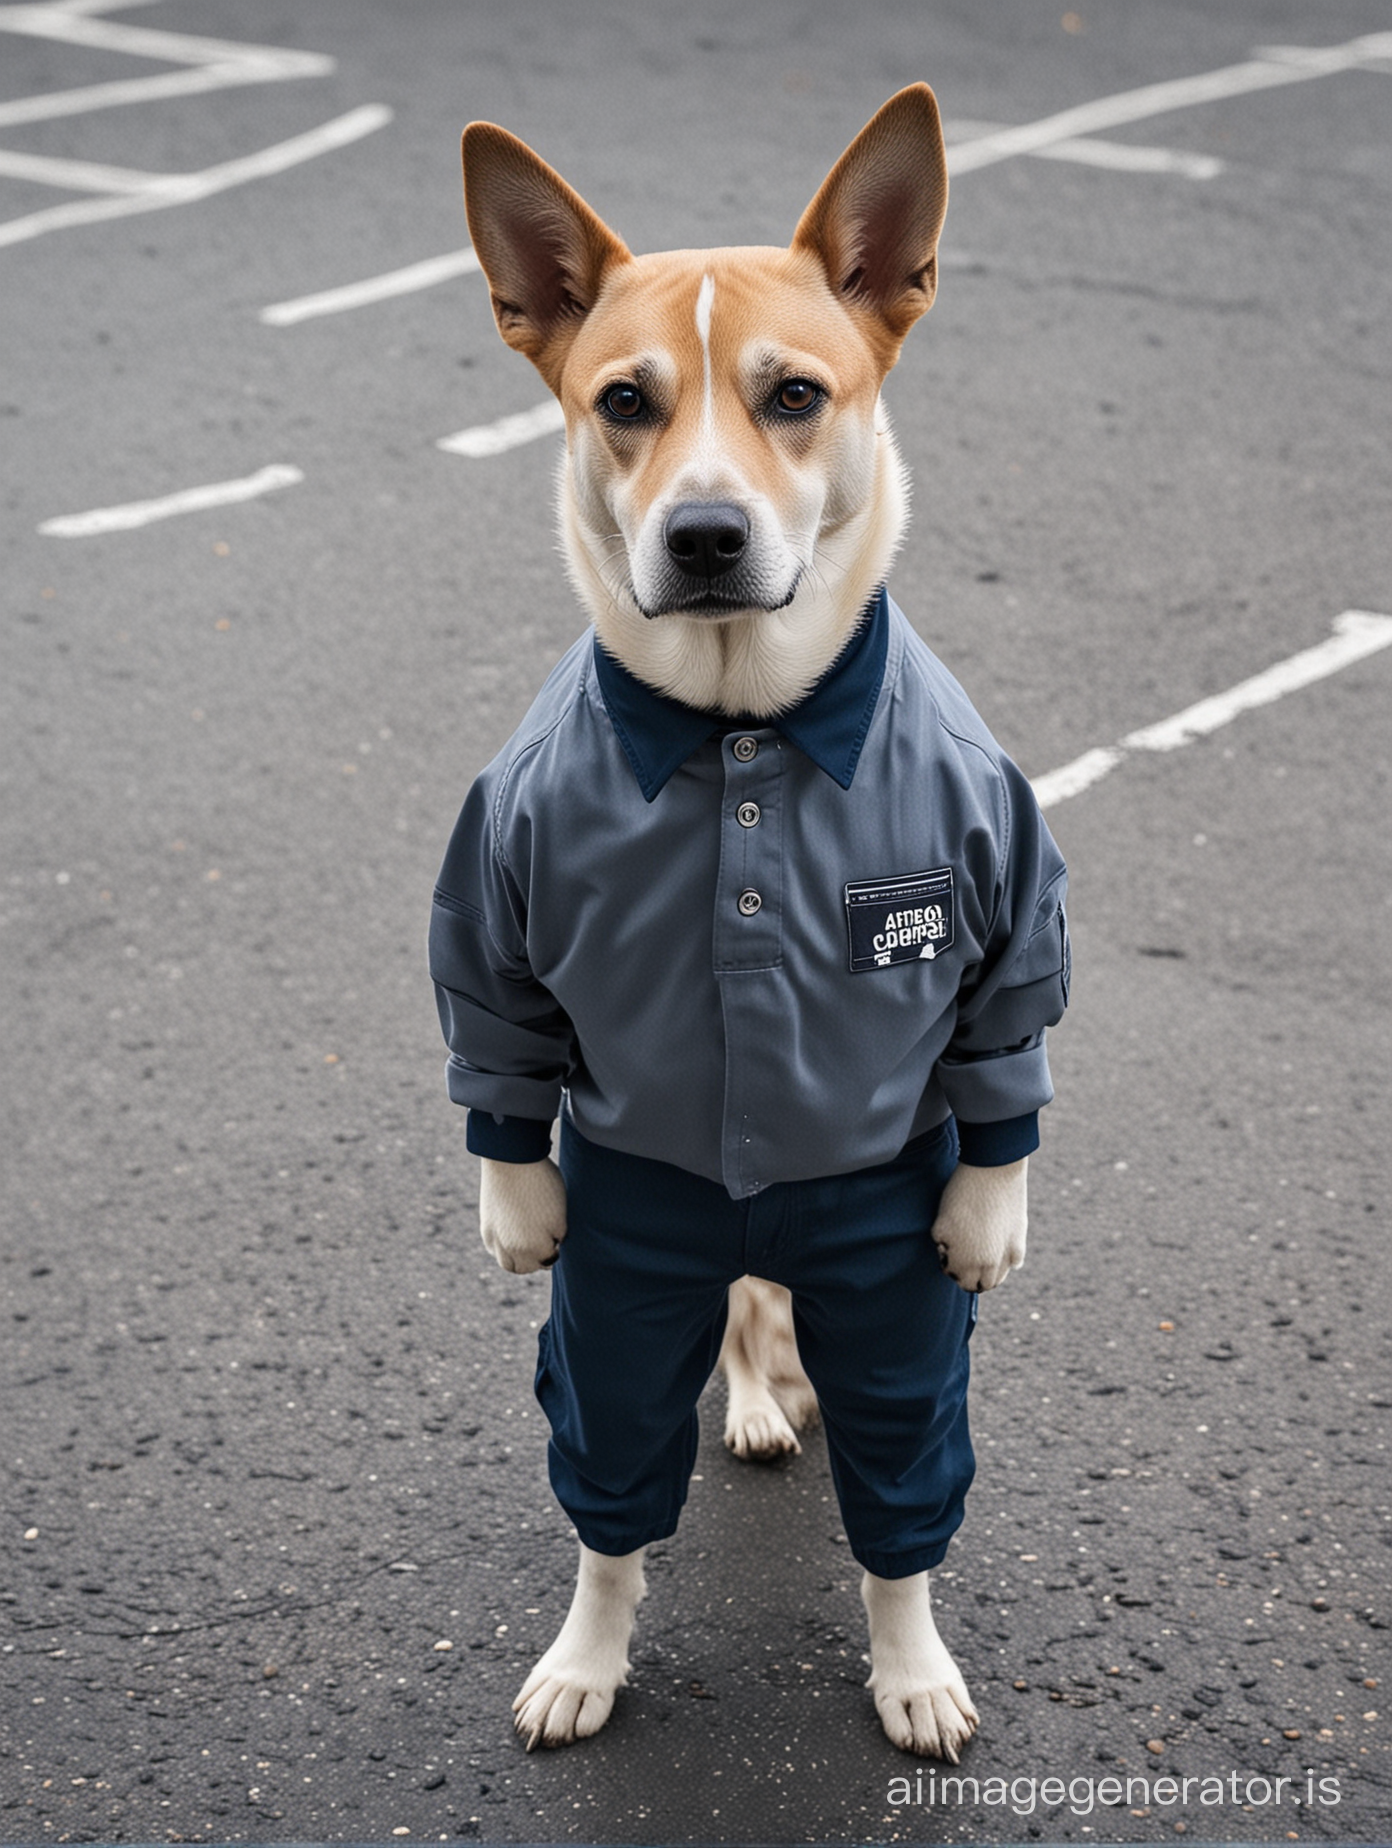  a dog with human gray uniform and dark blue pant standing front of parking. MAKE IT LIKE A human and just have dog head 